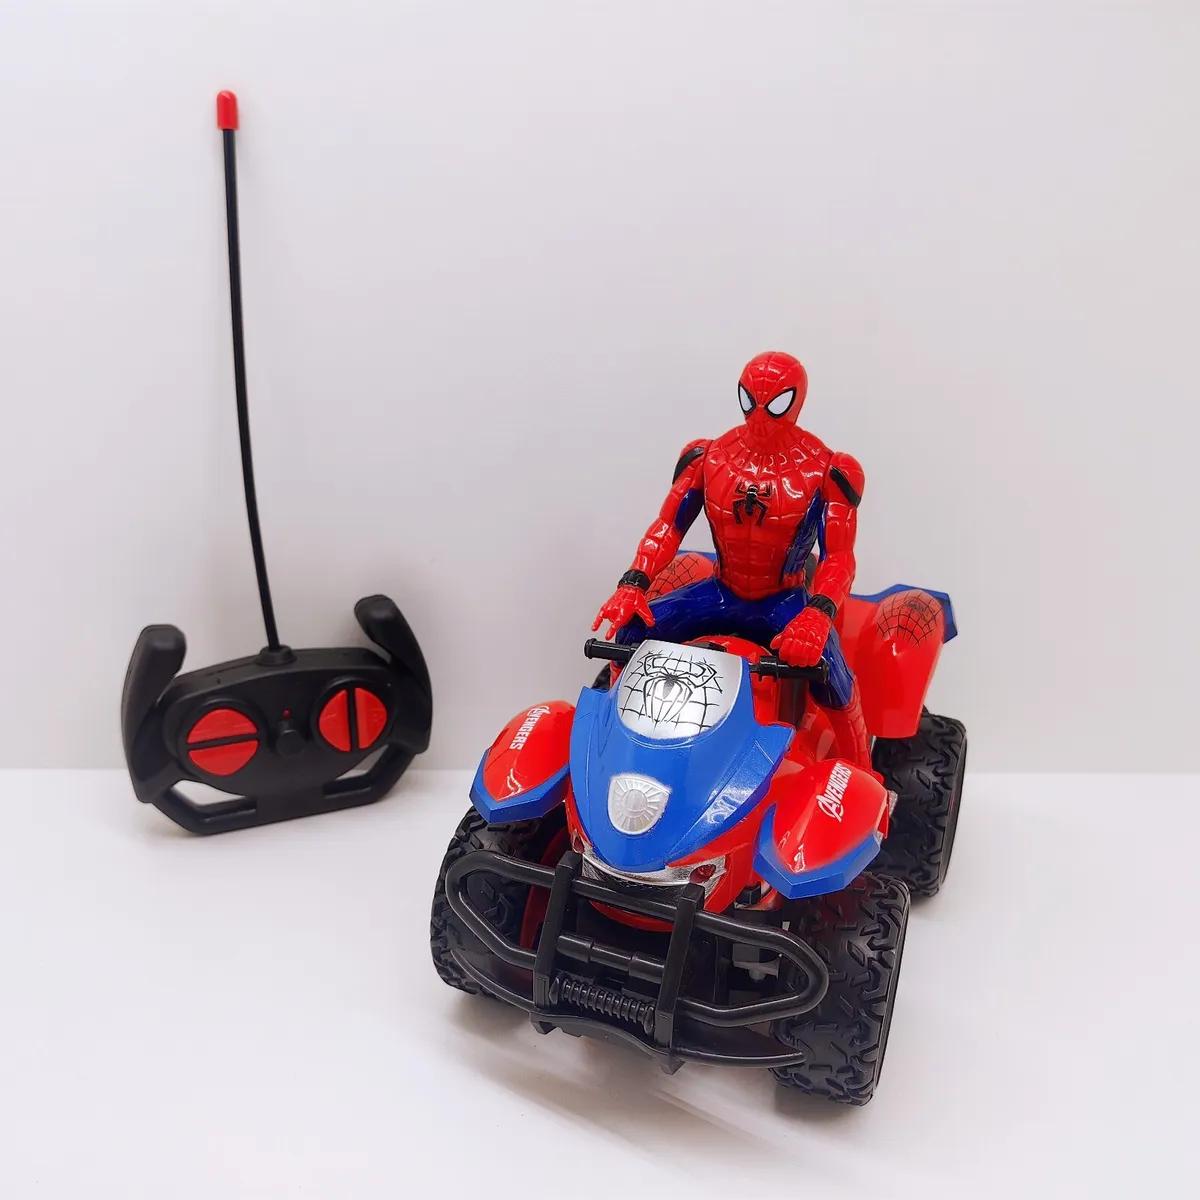 Spider Man Remote Control:  Advanced Features and Realistic Design